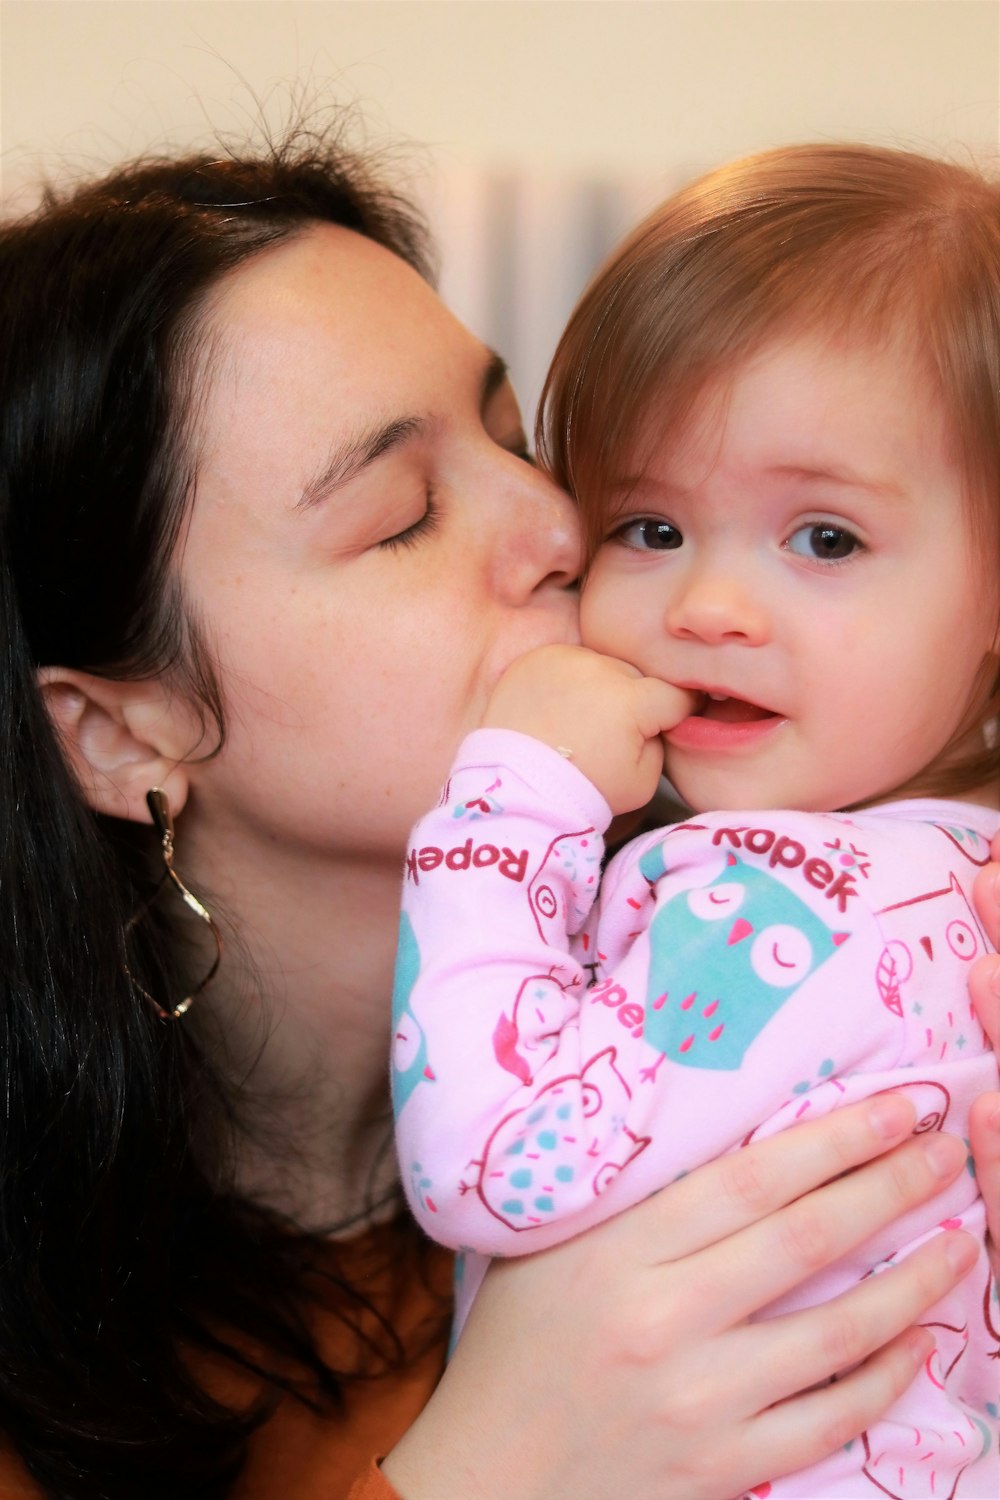 a woman kissing a baby with her mouth open